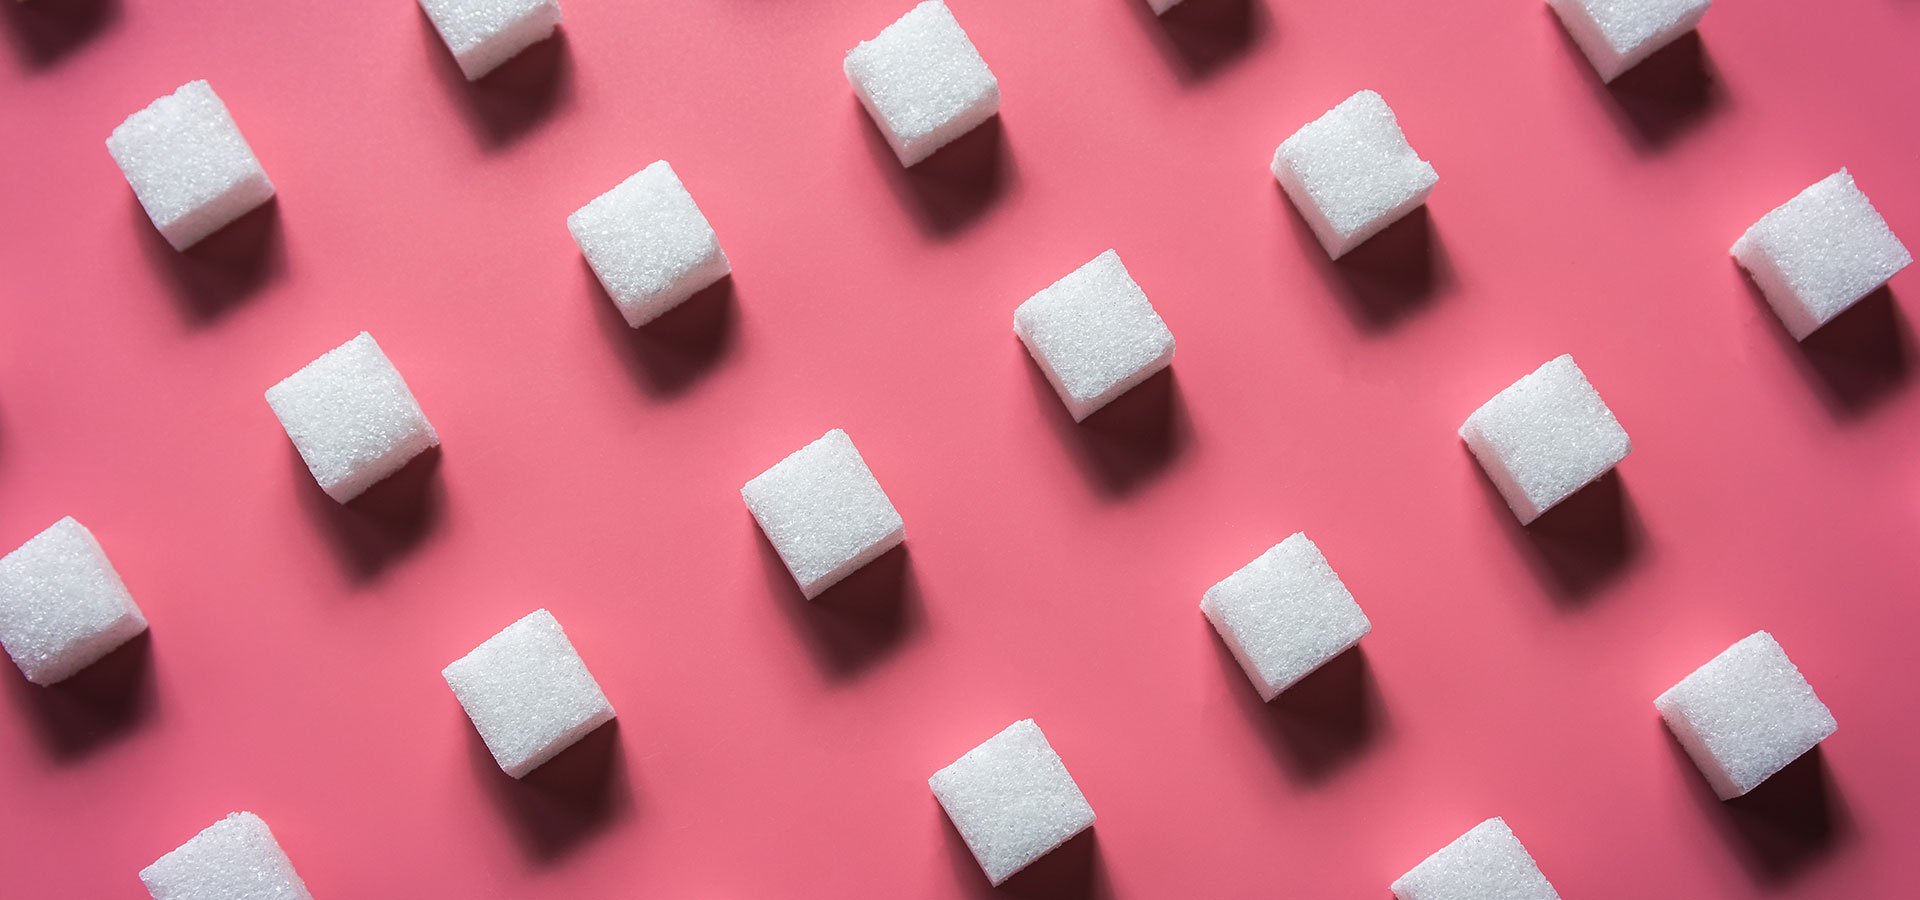 The Dangers of Artificial Sweeteners and Added Sugar